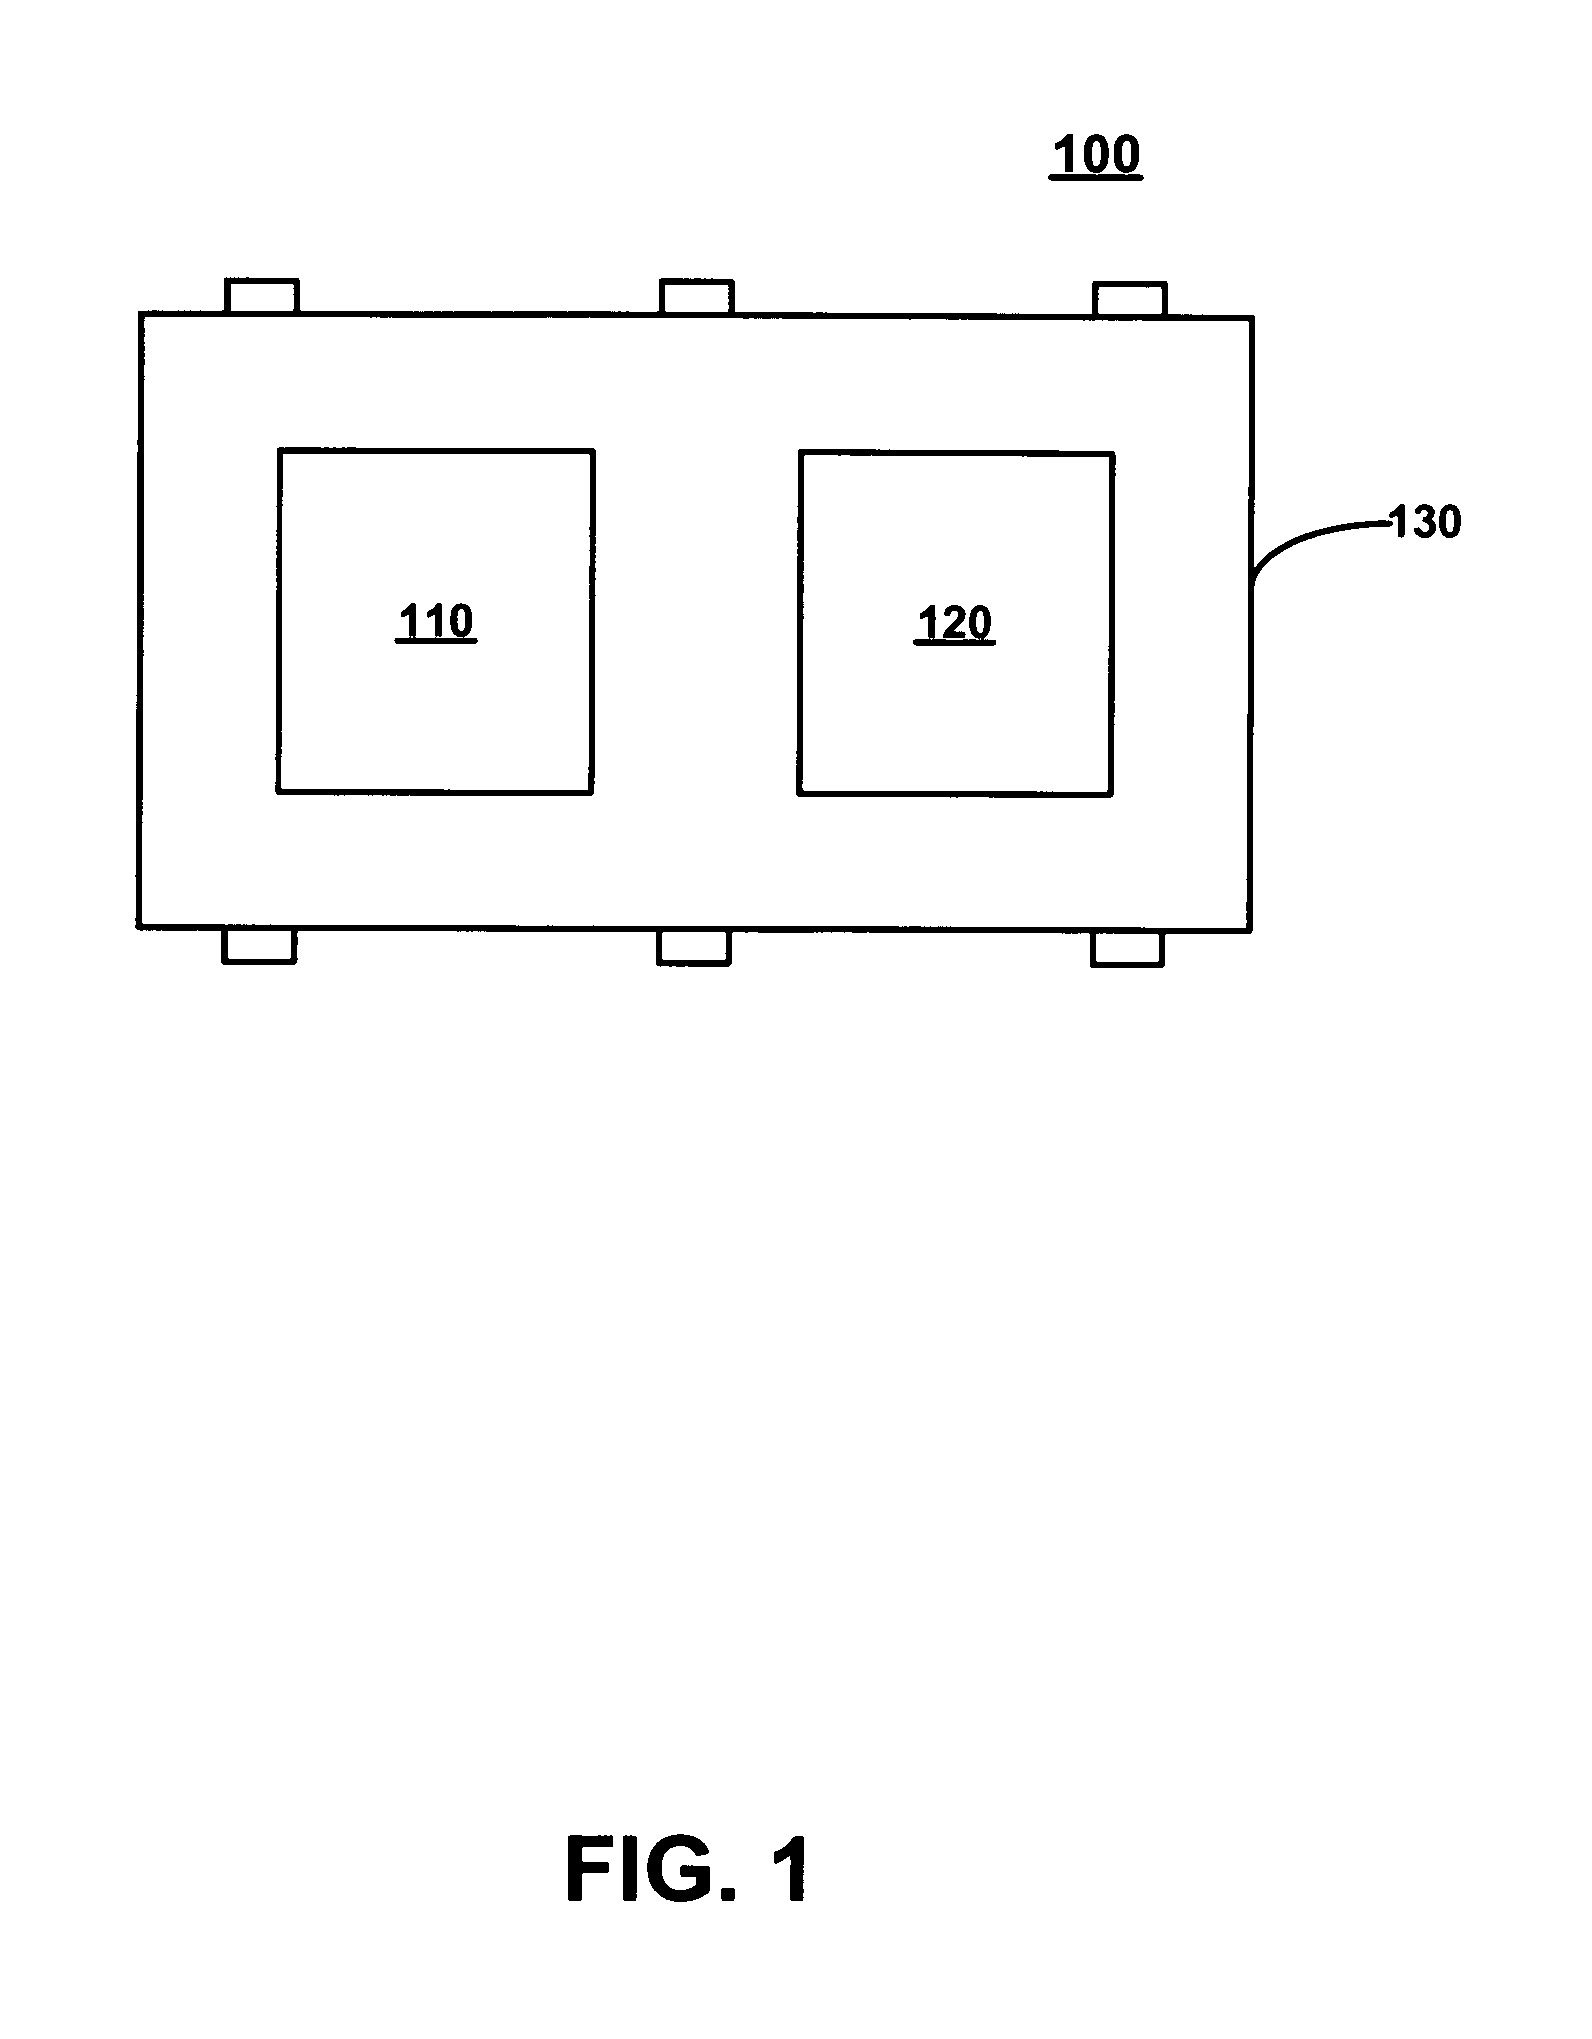 System and method for converting ambient light energy into a digitized electrical output signal for controlling display and keypad illumination on a battery powered system